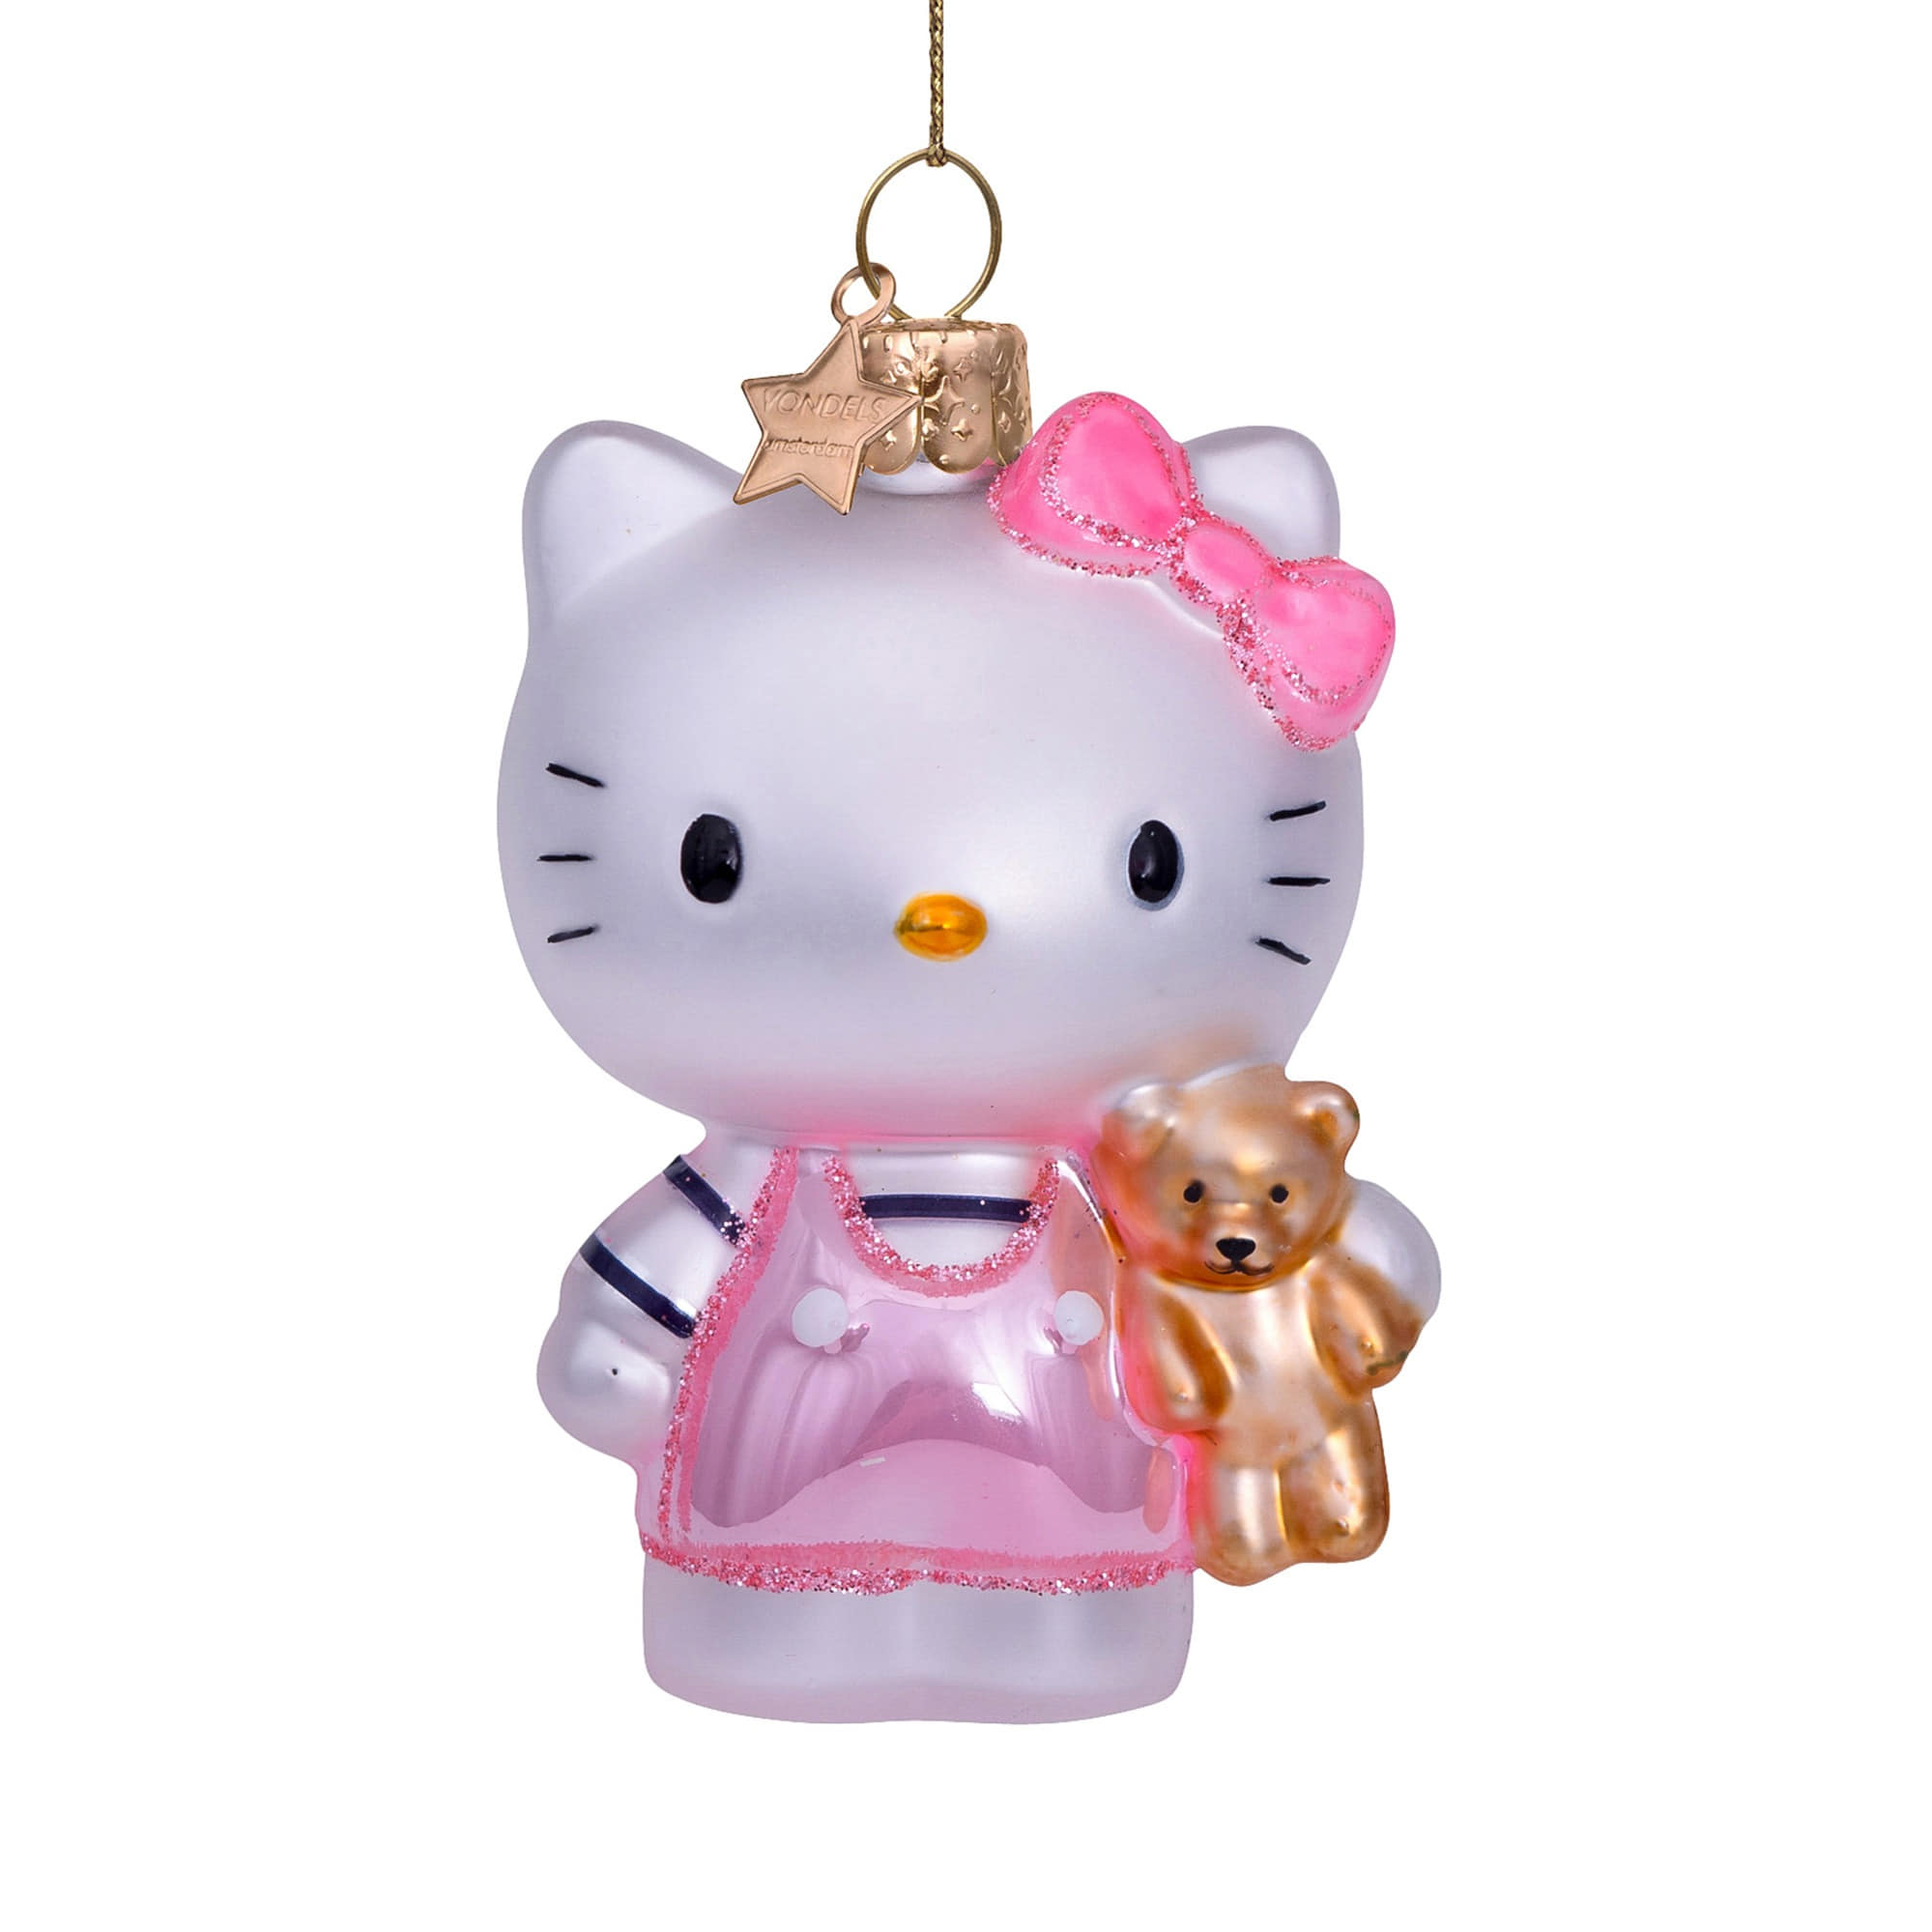 VONDELS Ornament Glass Hello Kitty Pink with Bear